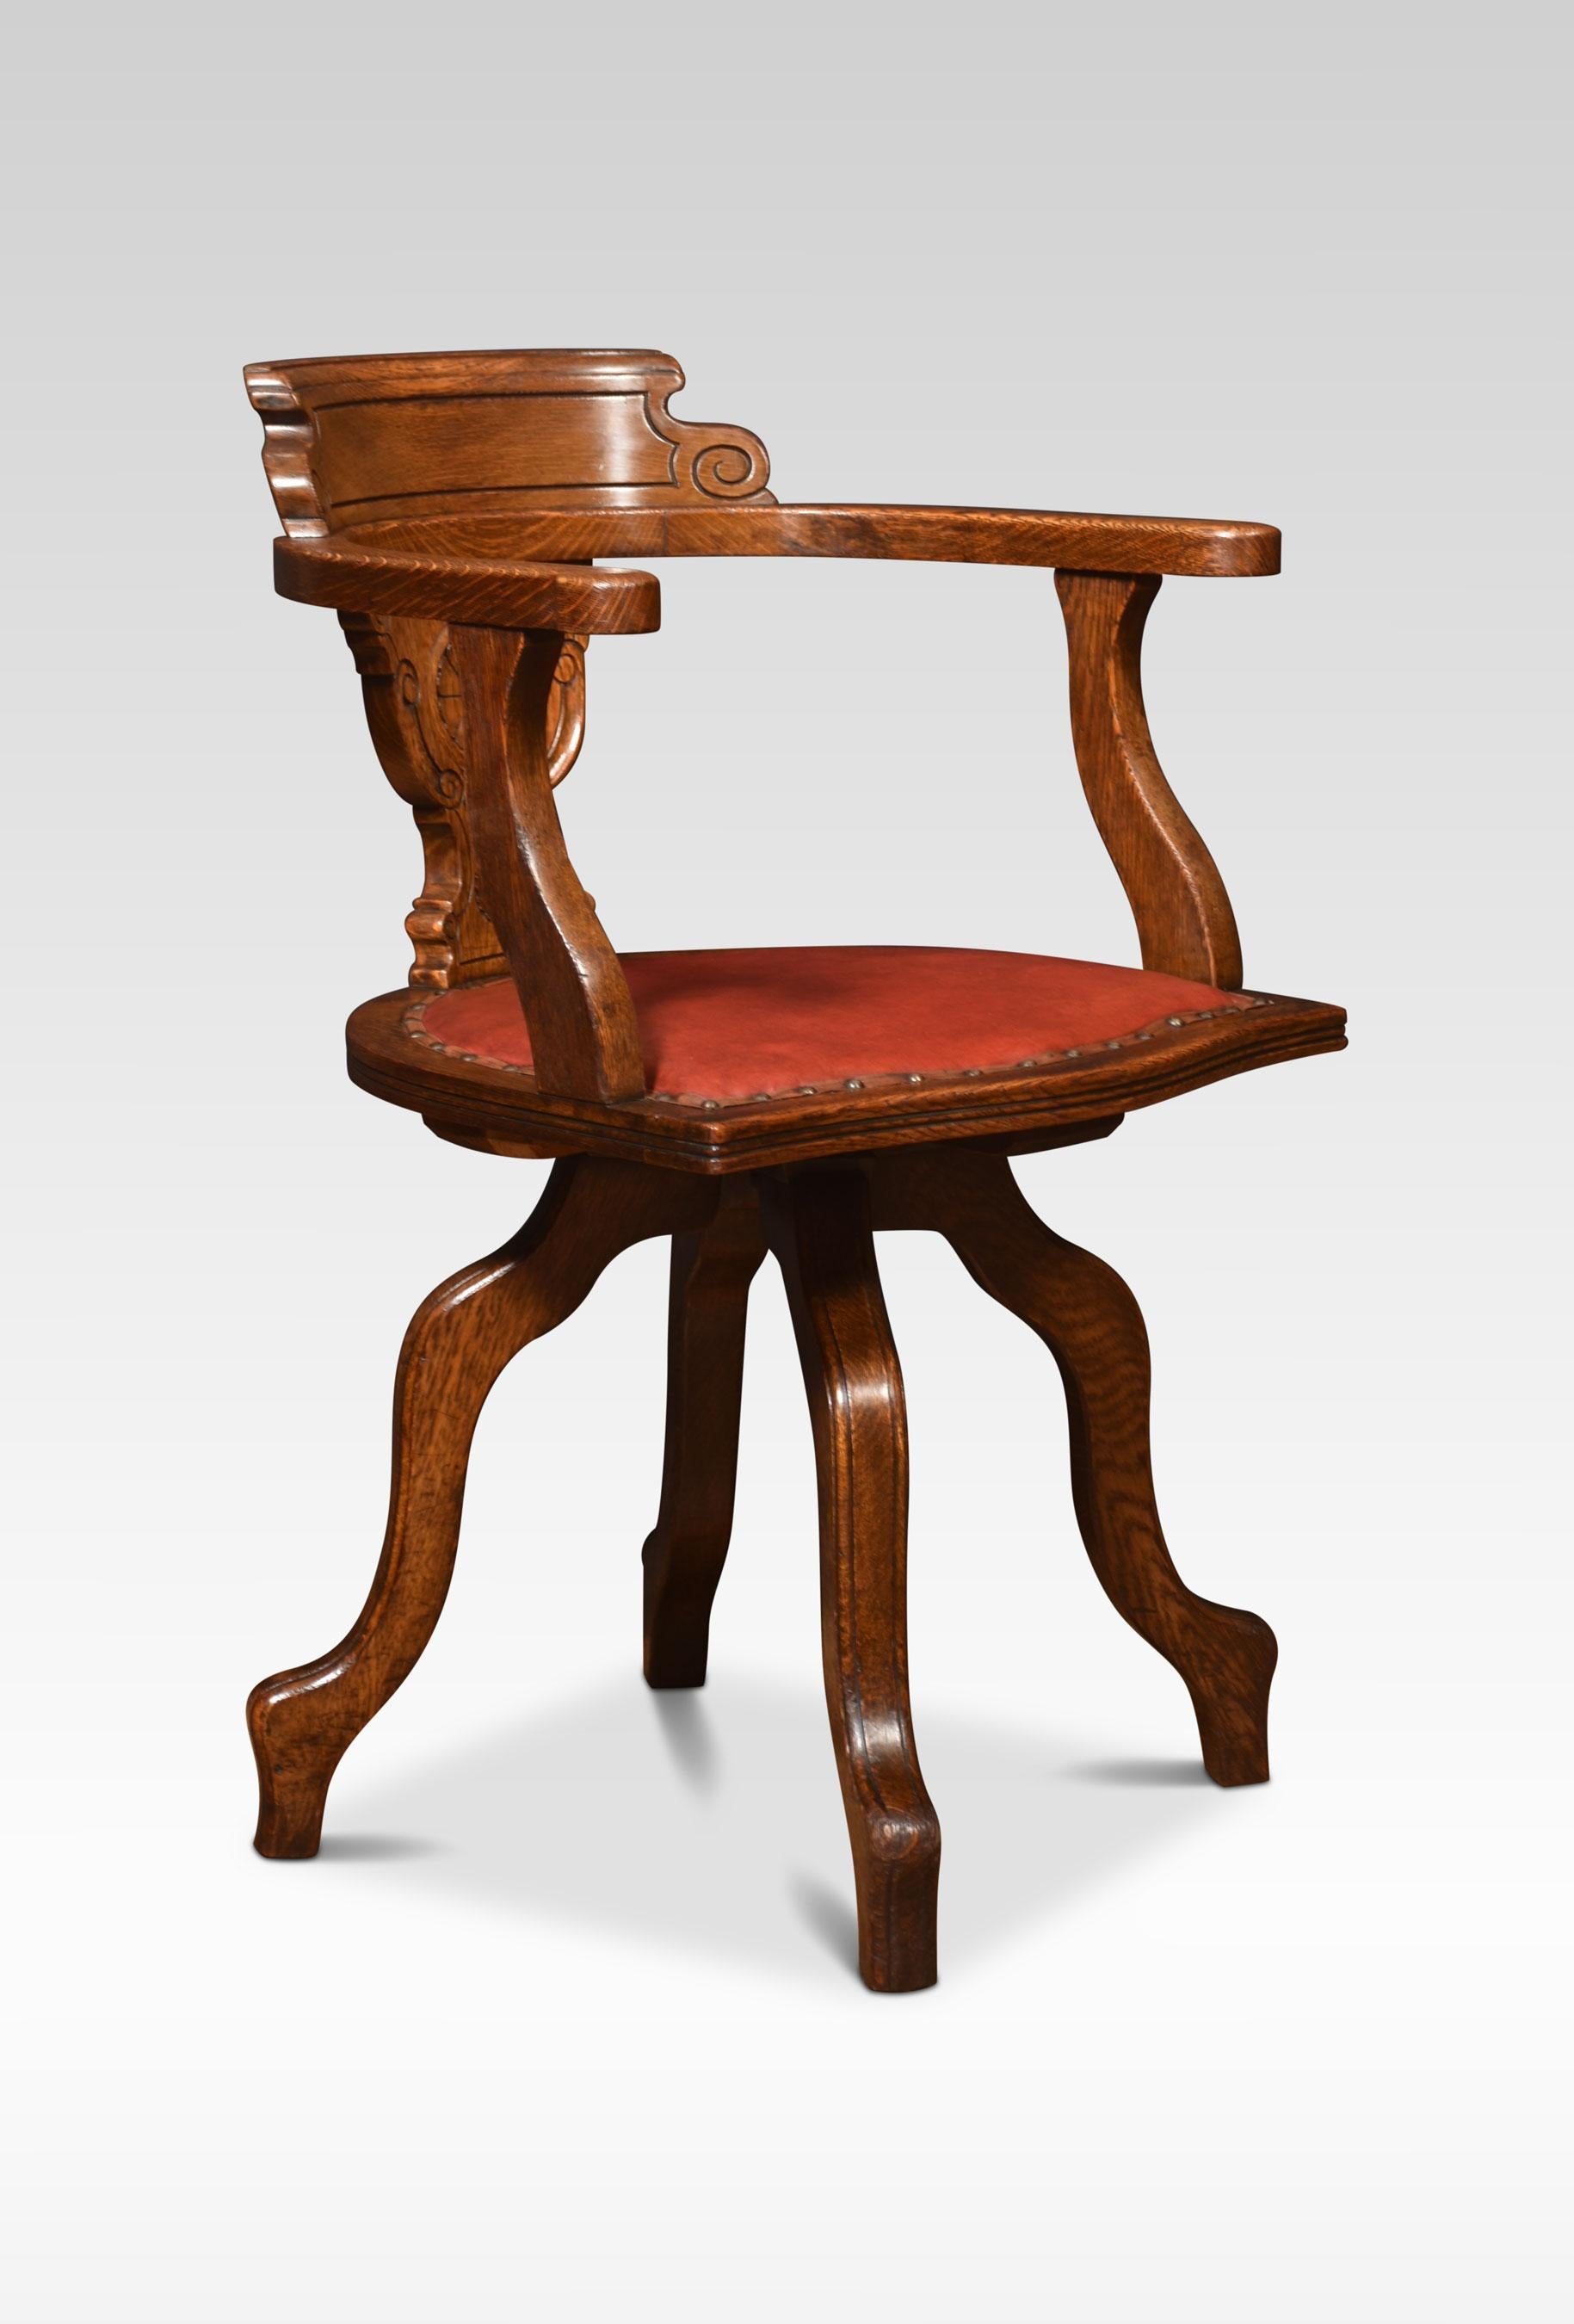 Pair of oak office / captain’s oak revolving office chairs with carved shaped back and open arms above a solid oak seat with leather cushion. All raised up on four cabriole legs.
Dimensions
Height 34.5 Inches height to seat 20.5 Inches
Width 23.5